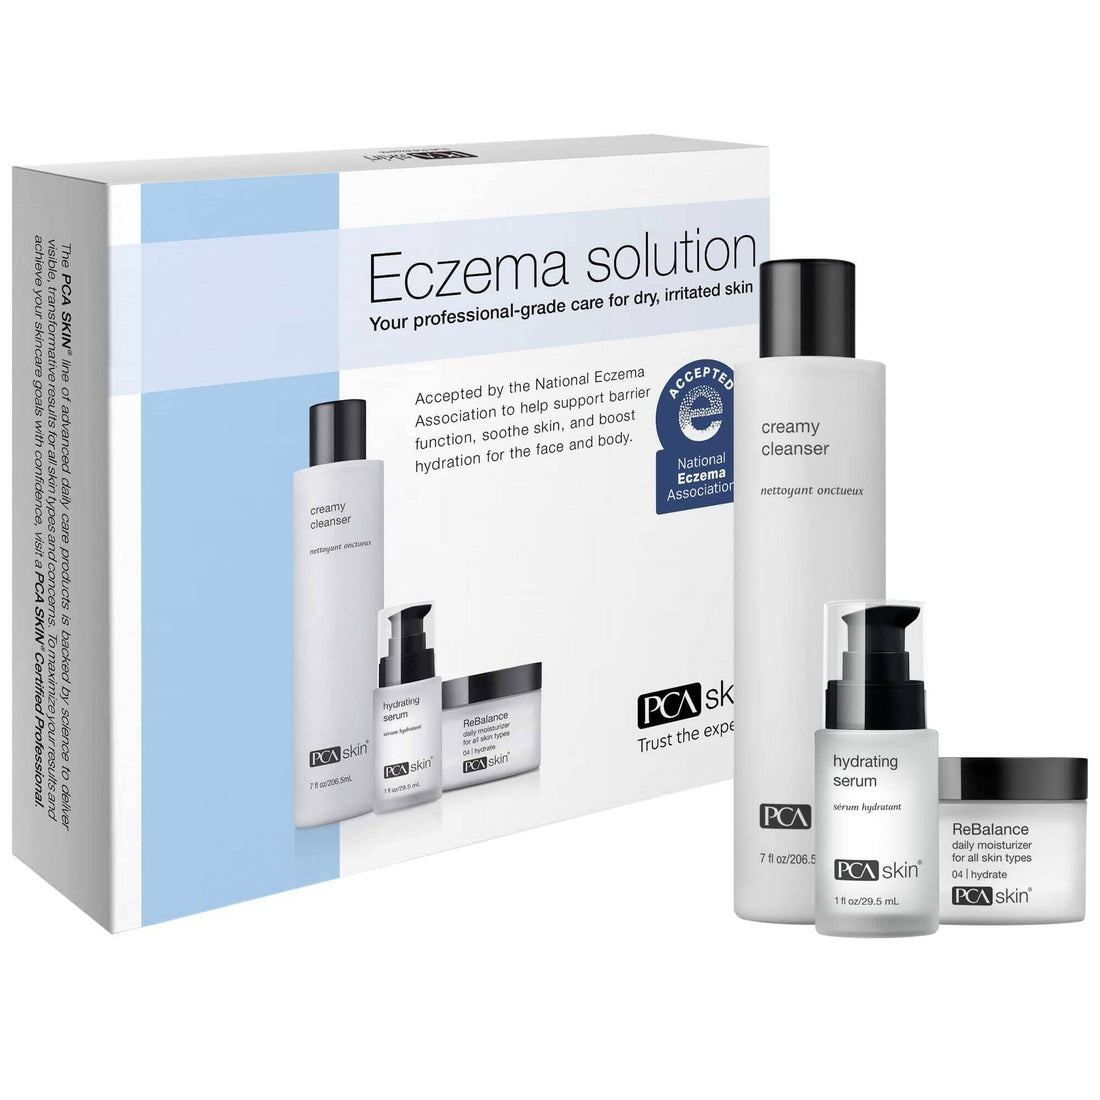 PCA Skin The Eczema Solution PCA Skin Shop at Skin Type Solutions